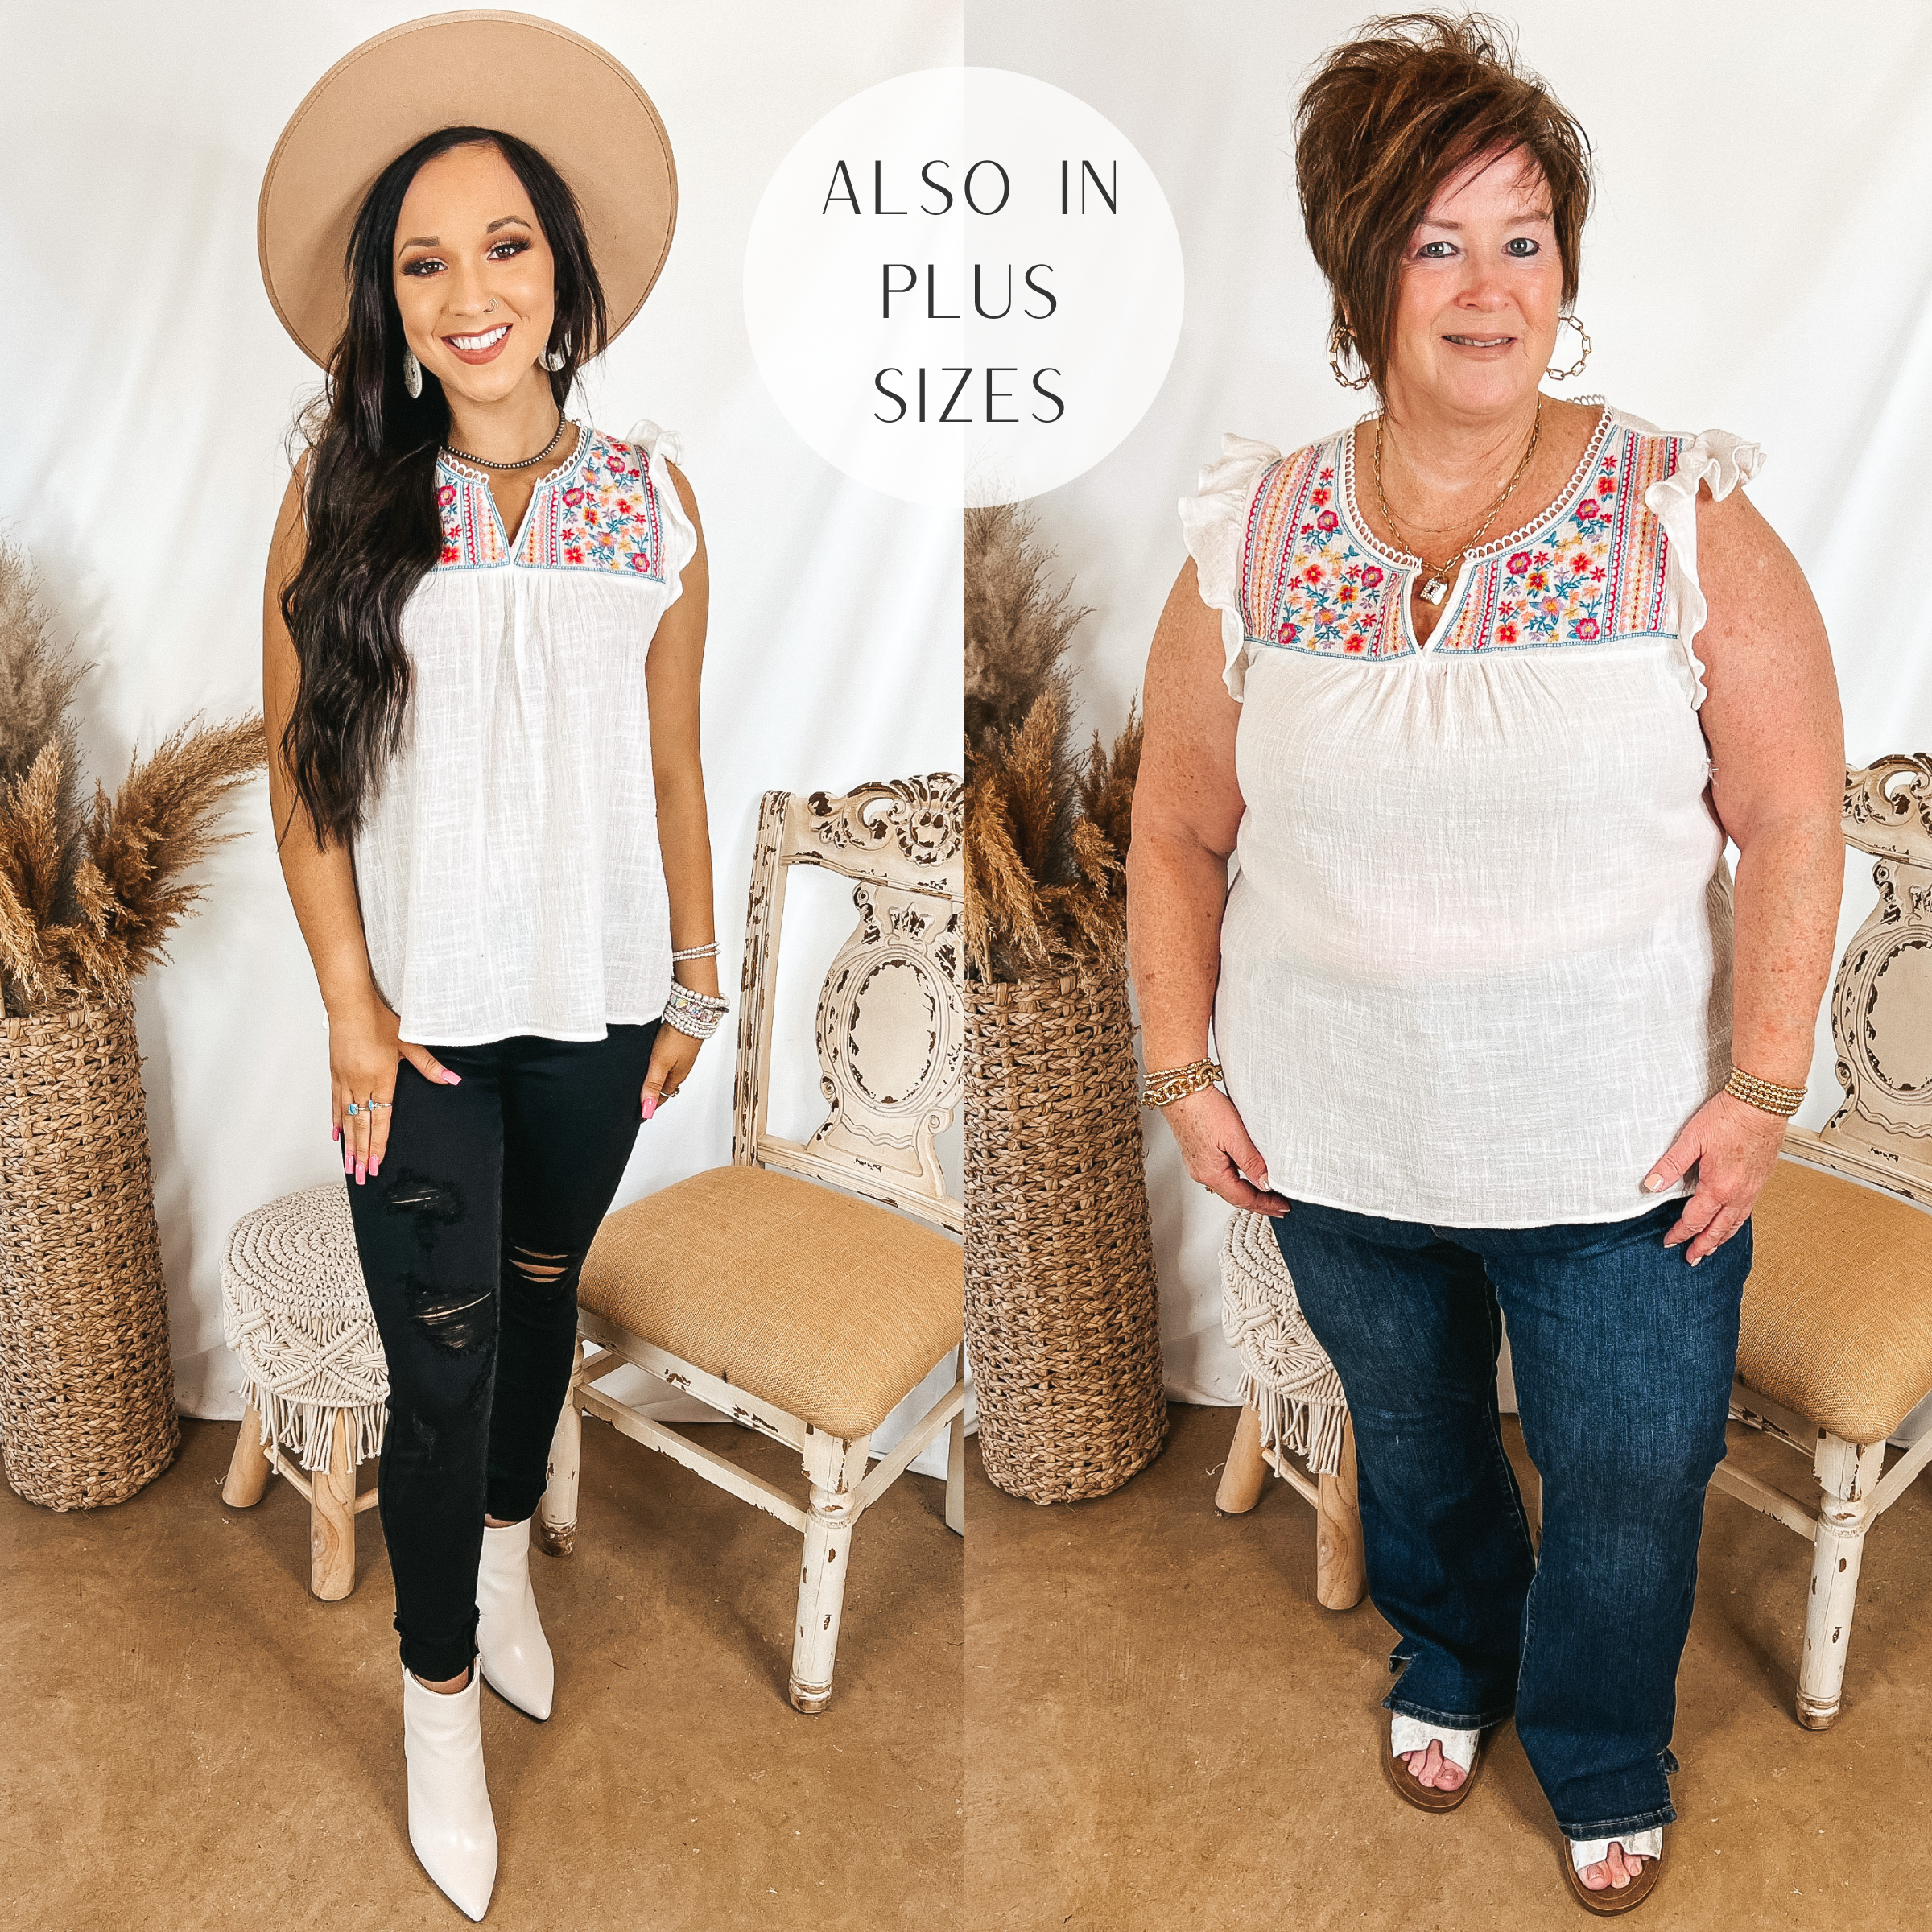 Models are wearing a white babydoll top with ruffle cap sleeves and an embroidered yoke. Size small model has it paired with black skinnies, white booties, and a tan hat. Plus size model has it paired with dark wash bootcut jeans, white sandals, and gold jewelry.